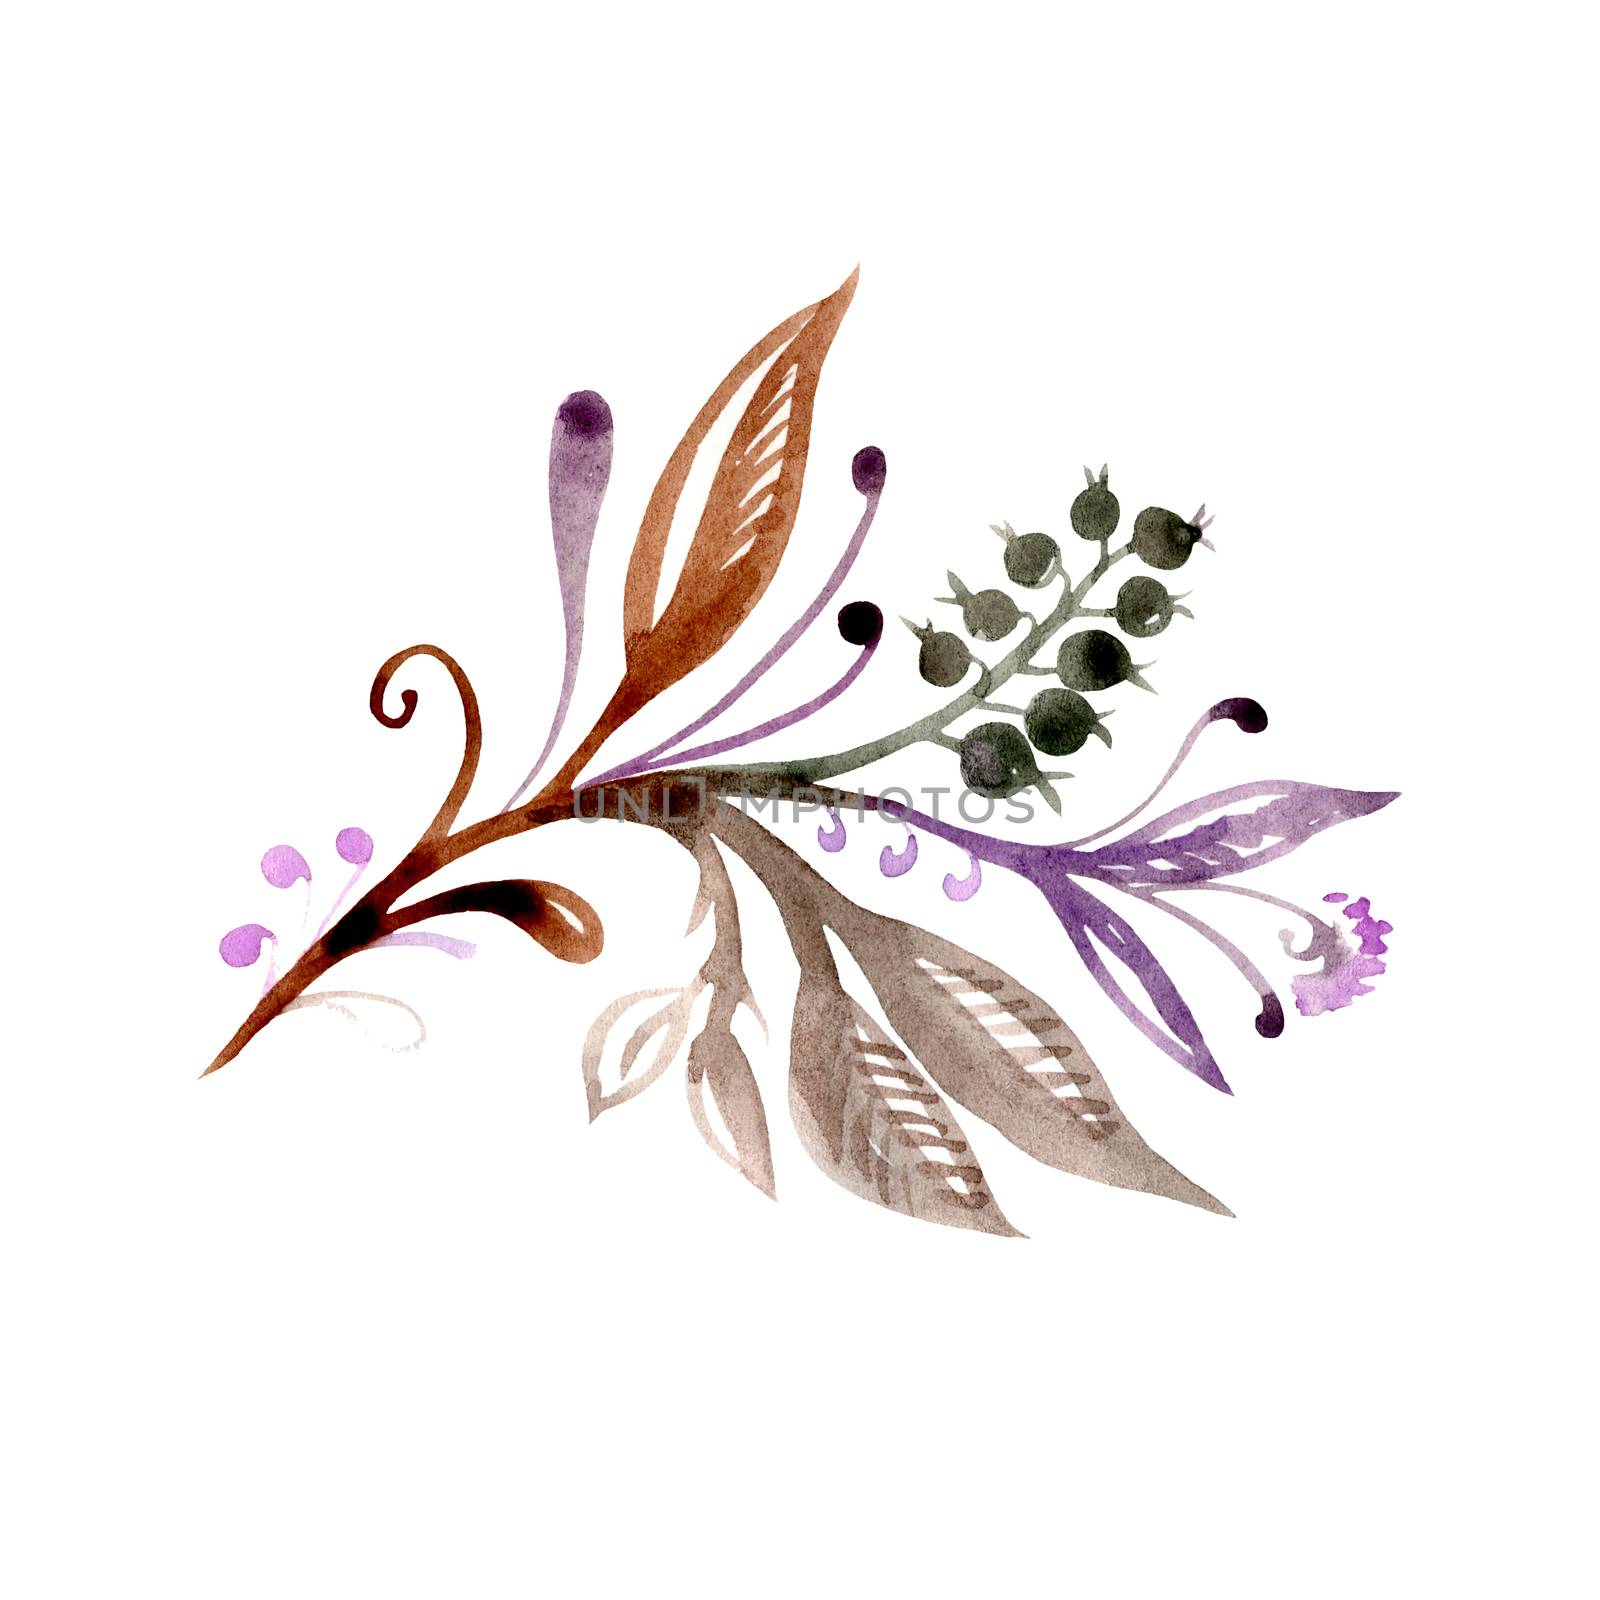 Watercolor abstract flower twig with leaves and berries in brown, green and purple colors, isolated on white background.